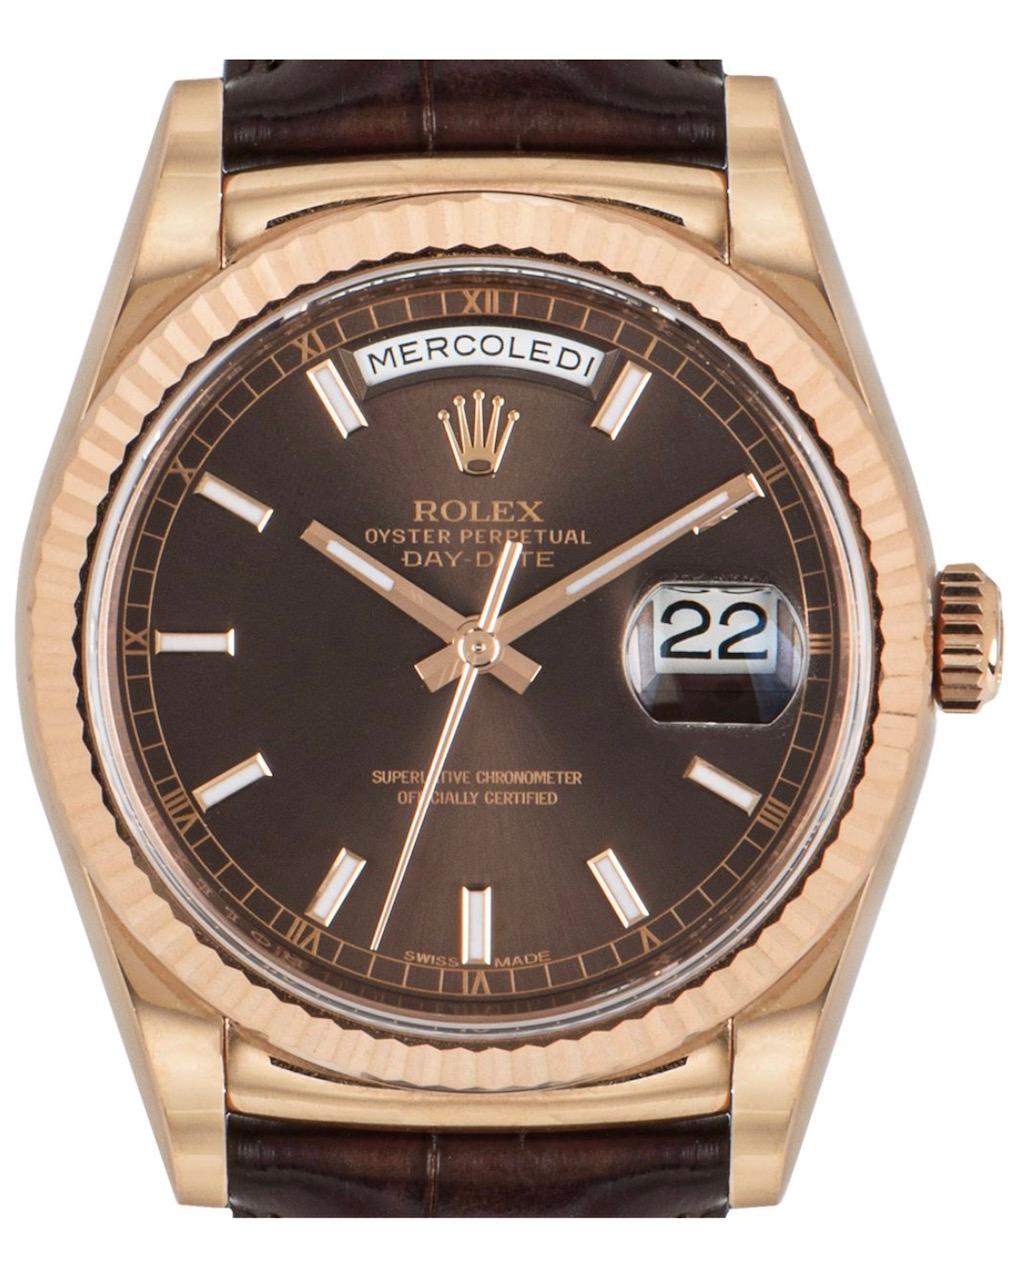 A 36mm Day-Date in rose gold, by Rolex. Featuring a distinctive chocolate dial with rose gold applied hour markers and a fixed rose gold fluted bezel. Fitted with a scratch resistant sapphire crystal and self-winding automatic movement. The watch is